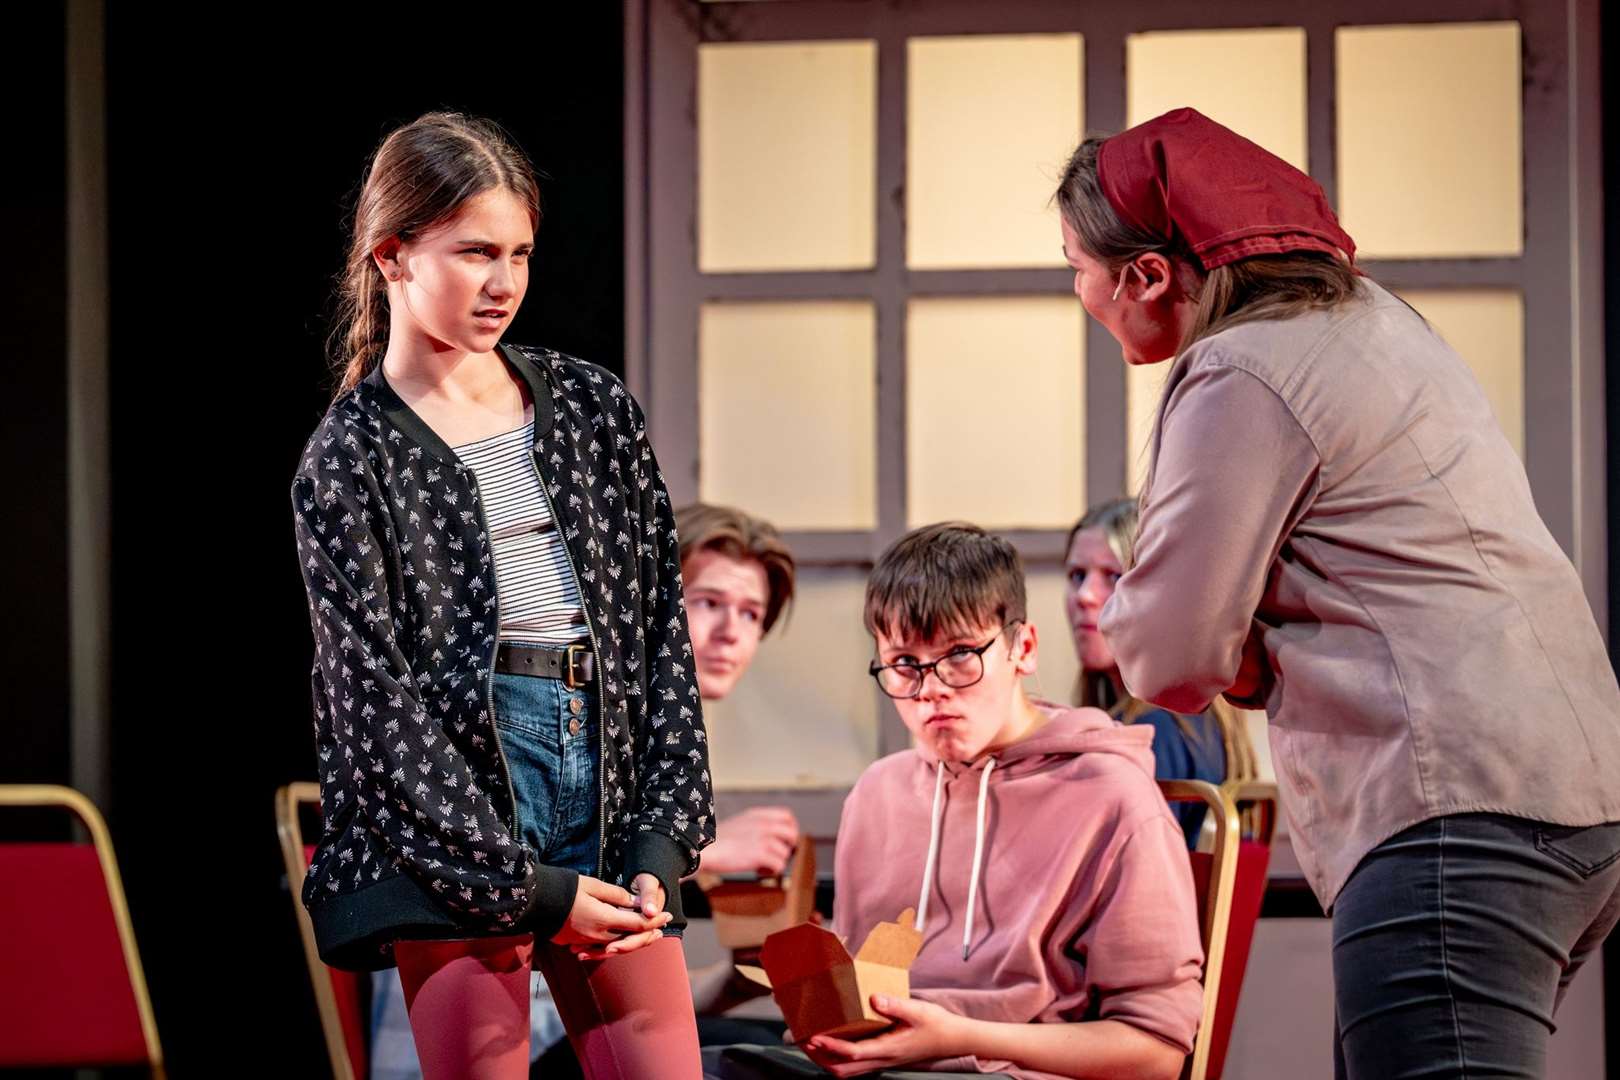 In The Trials children living in a scorched future judge their ancestors for failing to safeguard the planet. Picture: The Marlowe Theatre/Steve Gregson